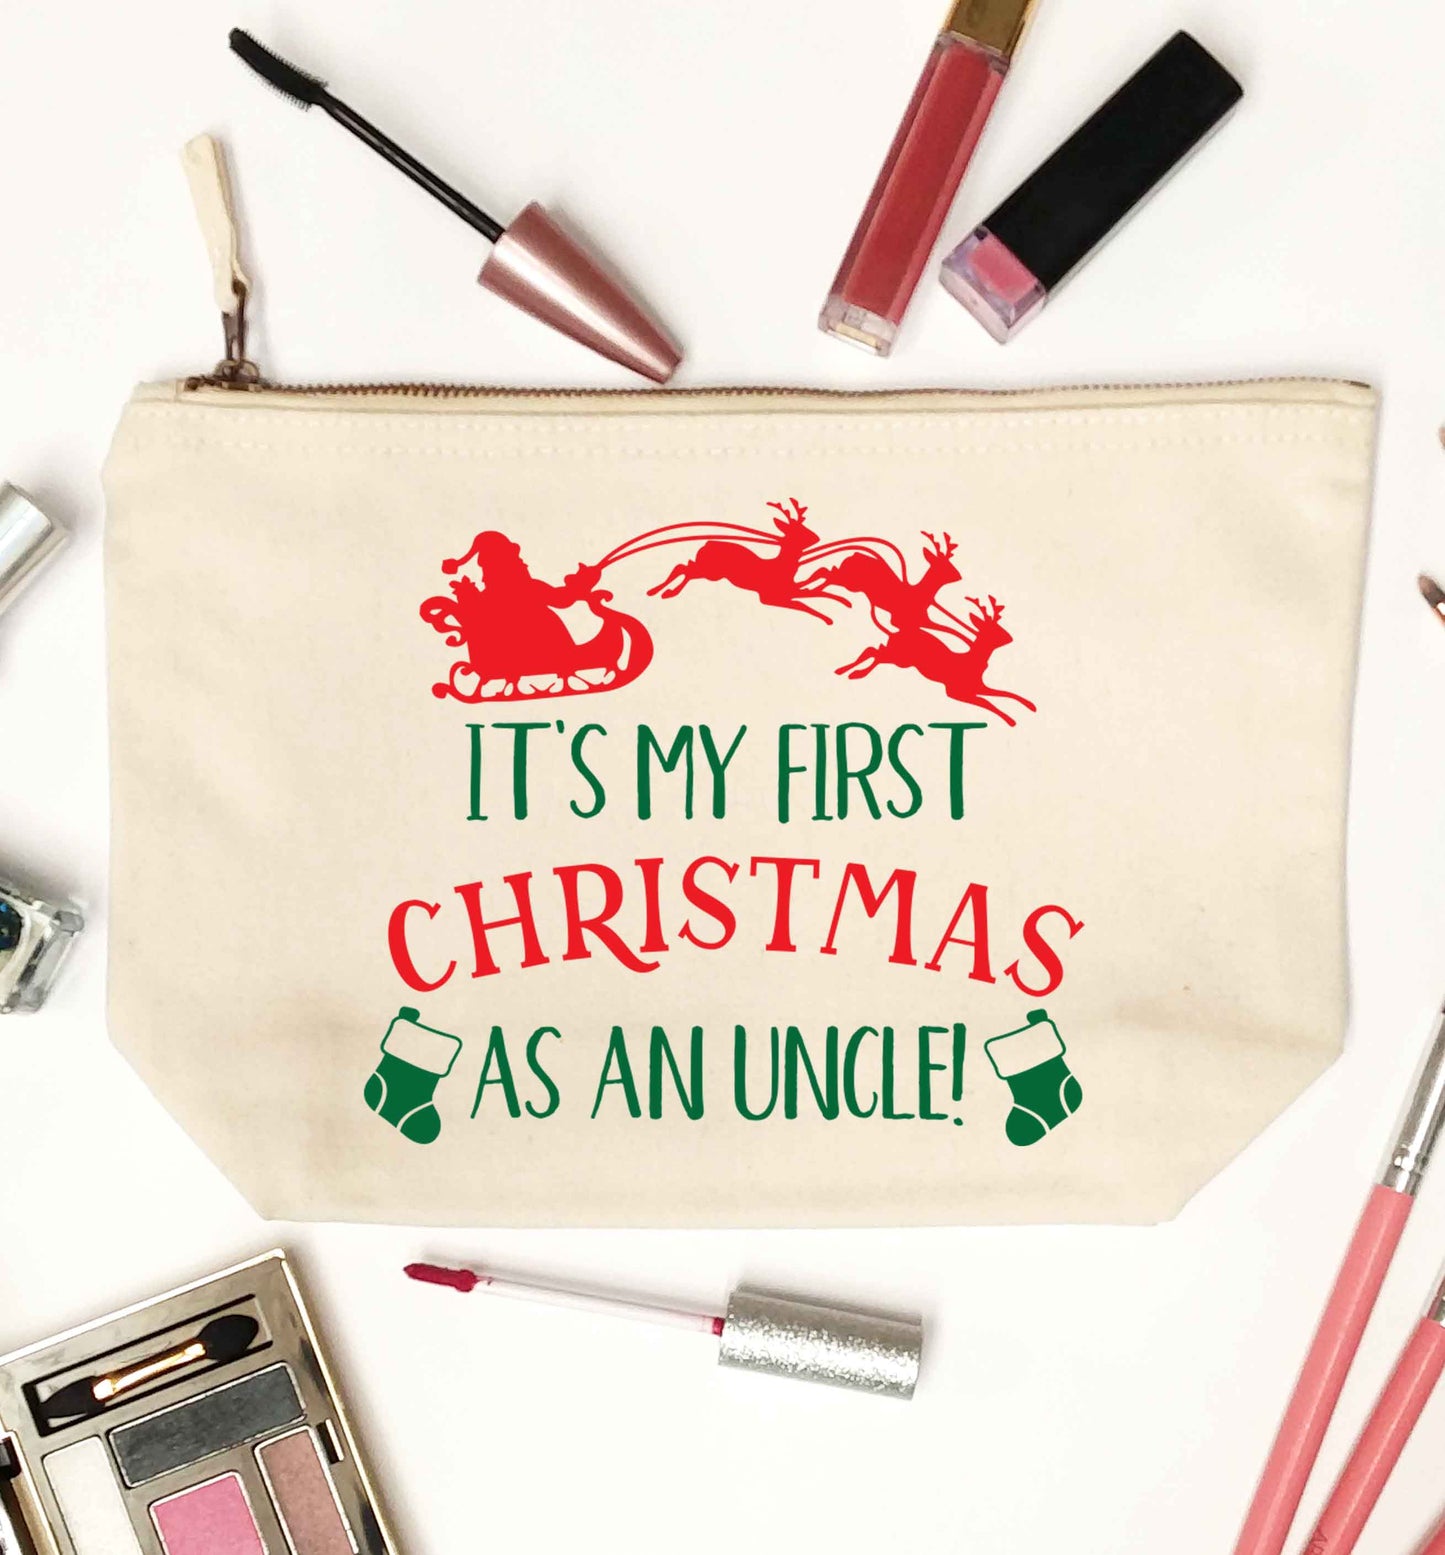 It's my first Christmas as an uncle! natural makeup bag